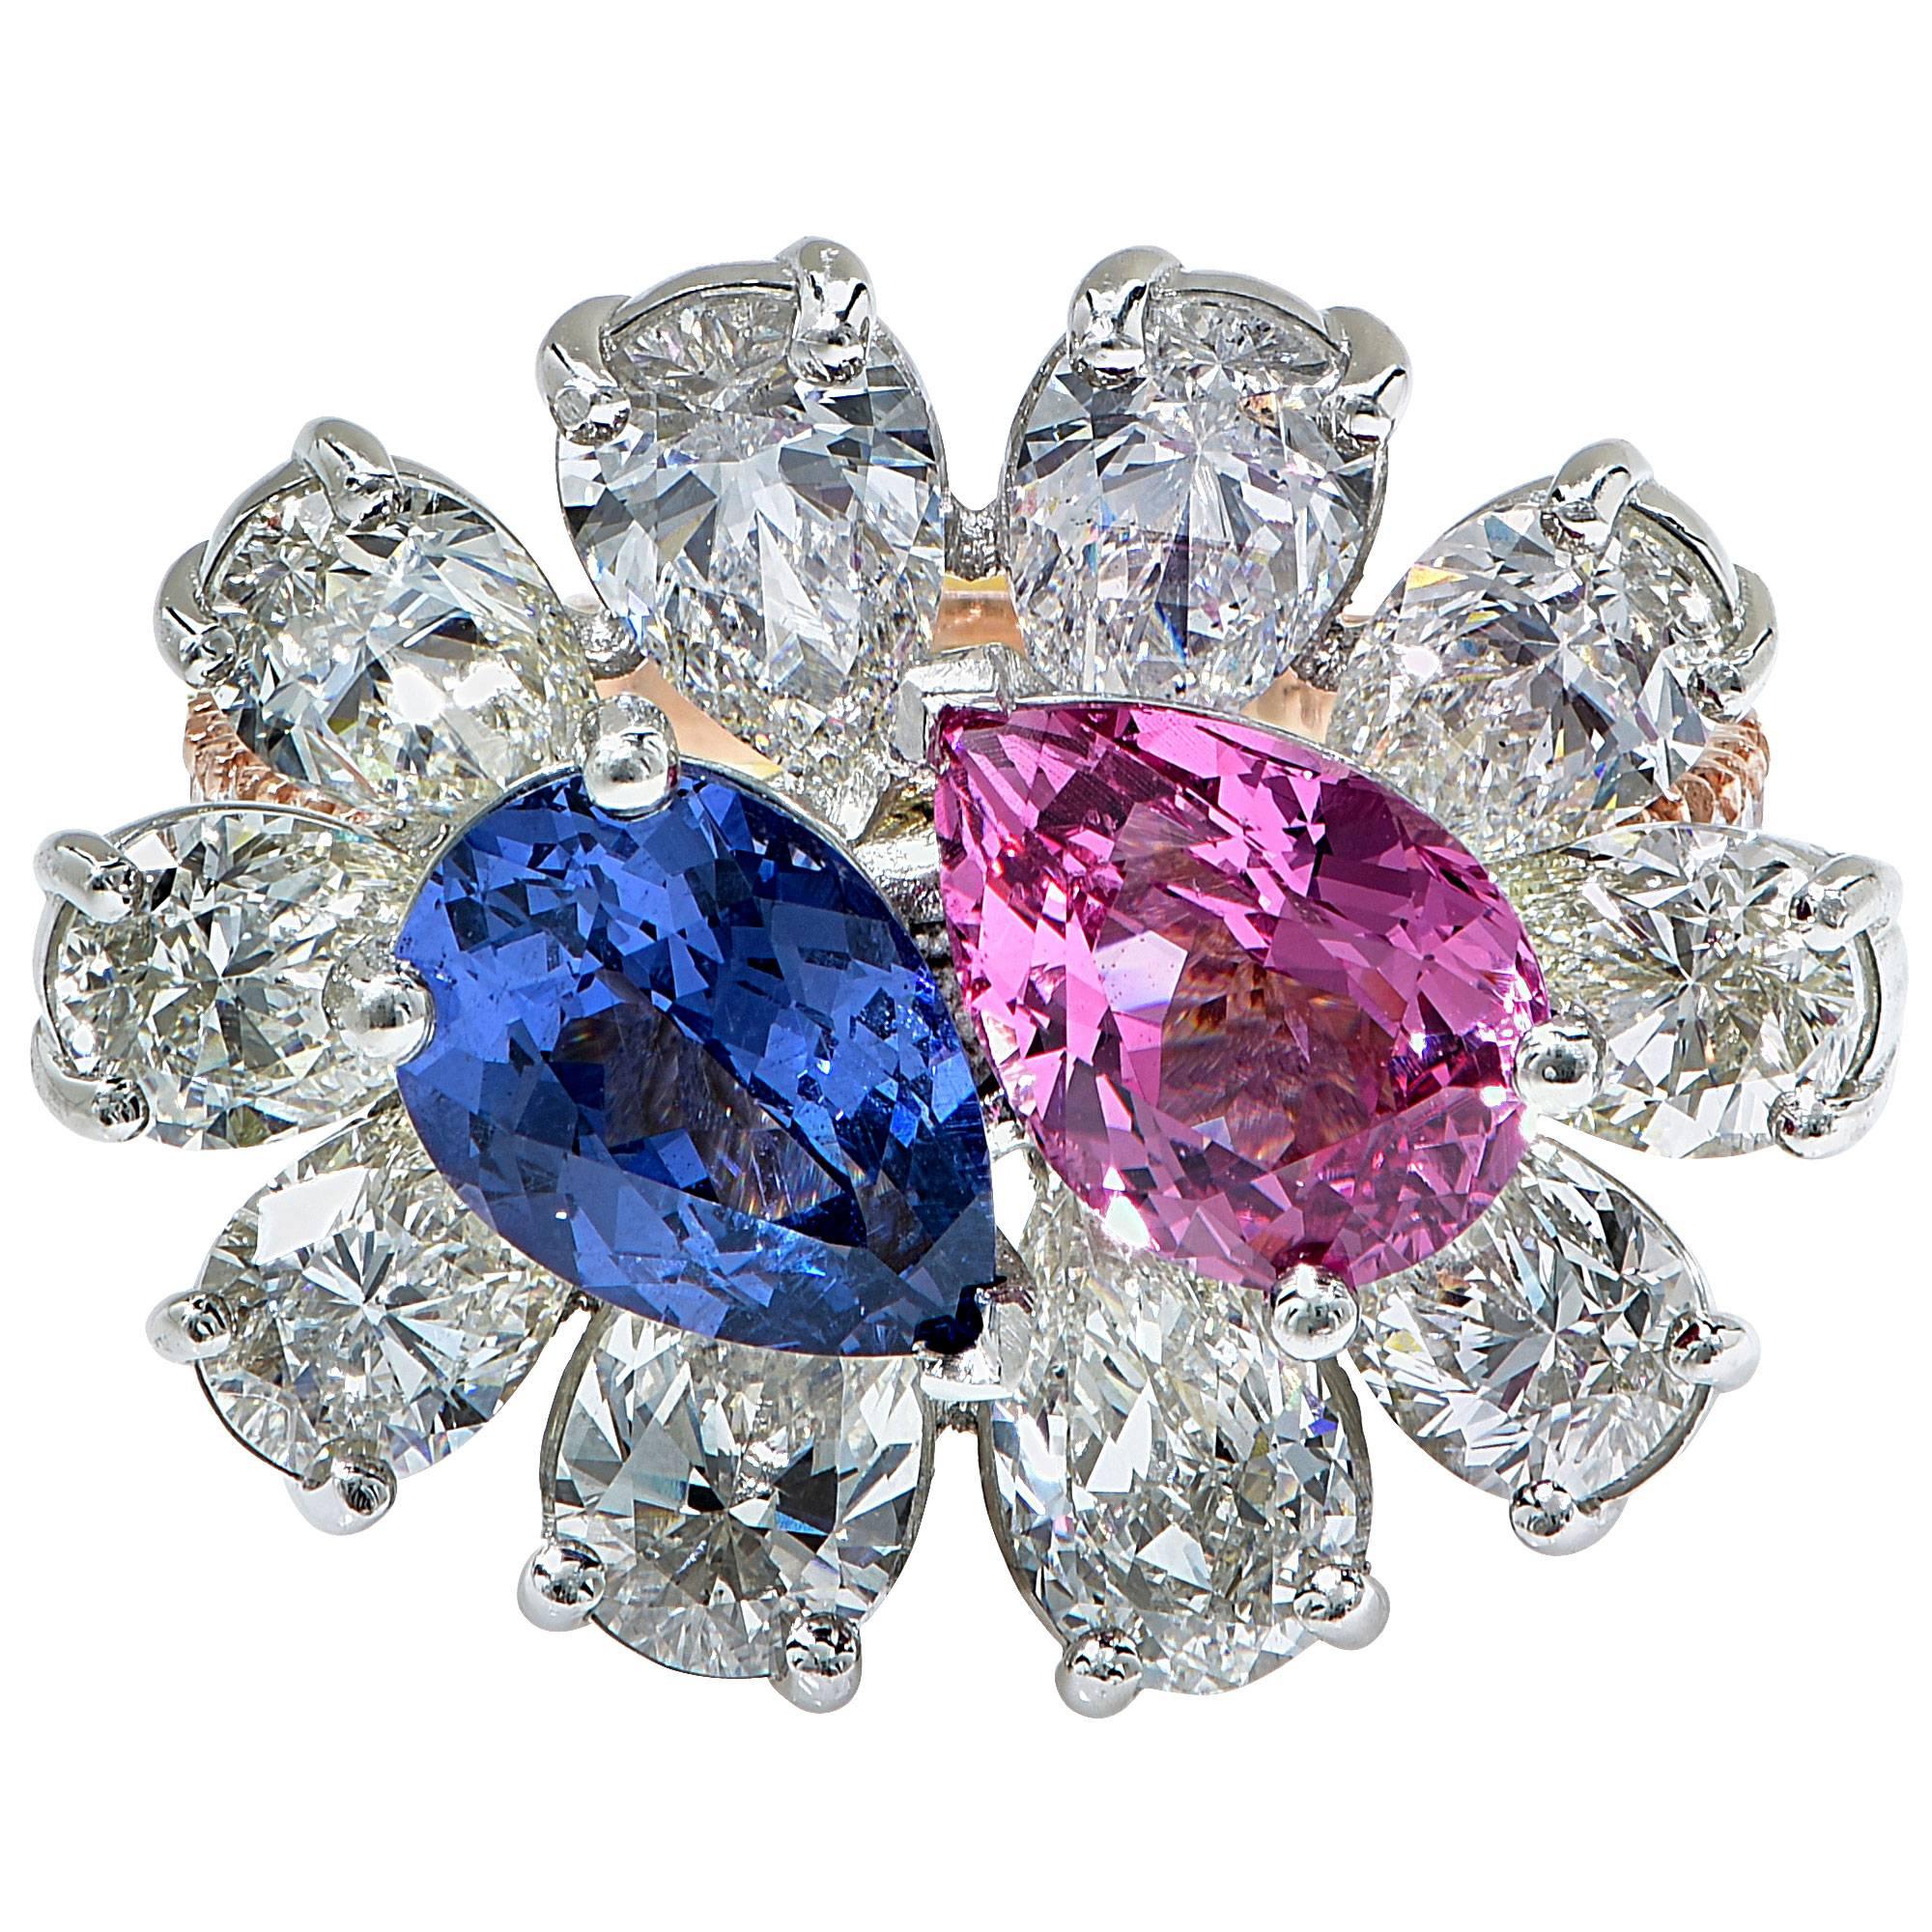 18k white and rose gold ring containing a blue and a pink spinel weighing approximately 3.50ct Total, surrounded by 10 pear shape diamonds weighing approximately 4.50cts.

Ring size: 6 (can be sized up or down free of charge)
Metal weight: 11.42